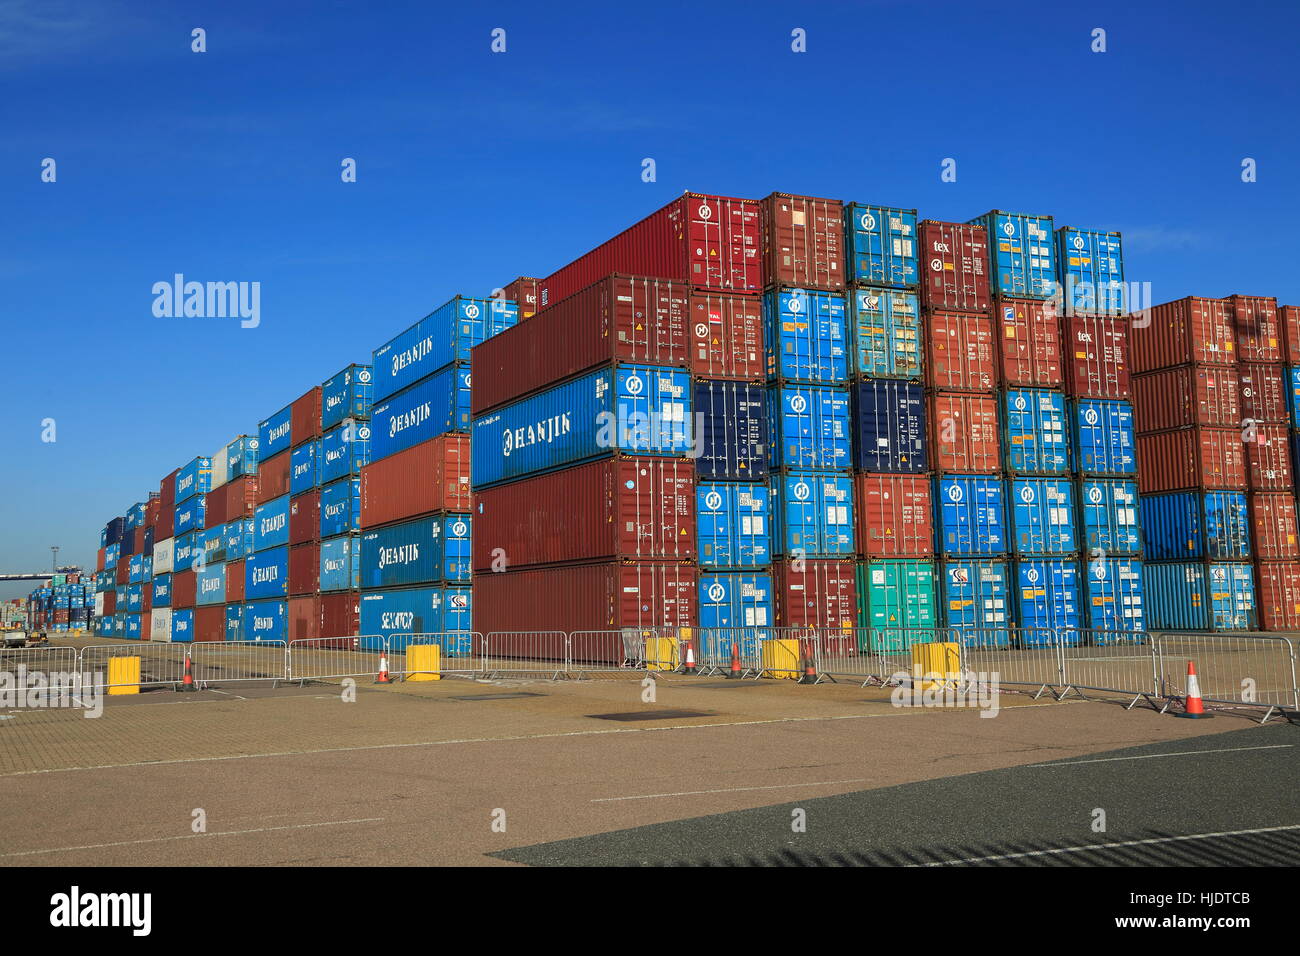 Containers stacked high on dockside, Port of Felixstowe, Suffolk, England, UK following bankruptcy of Hanjin shipping company in 2016 Stock Photo